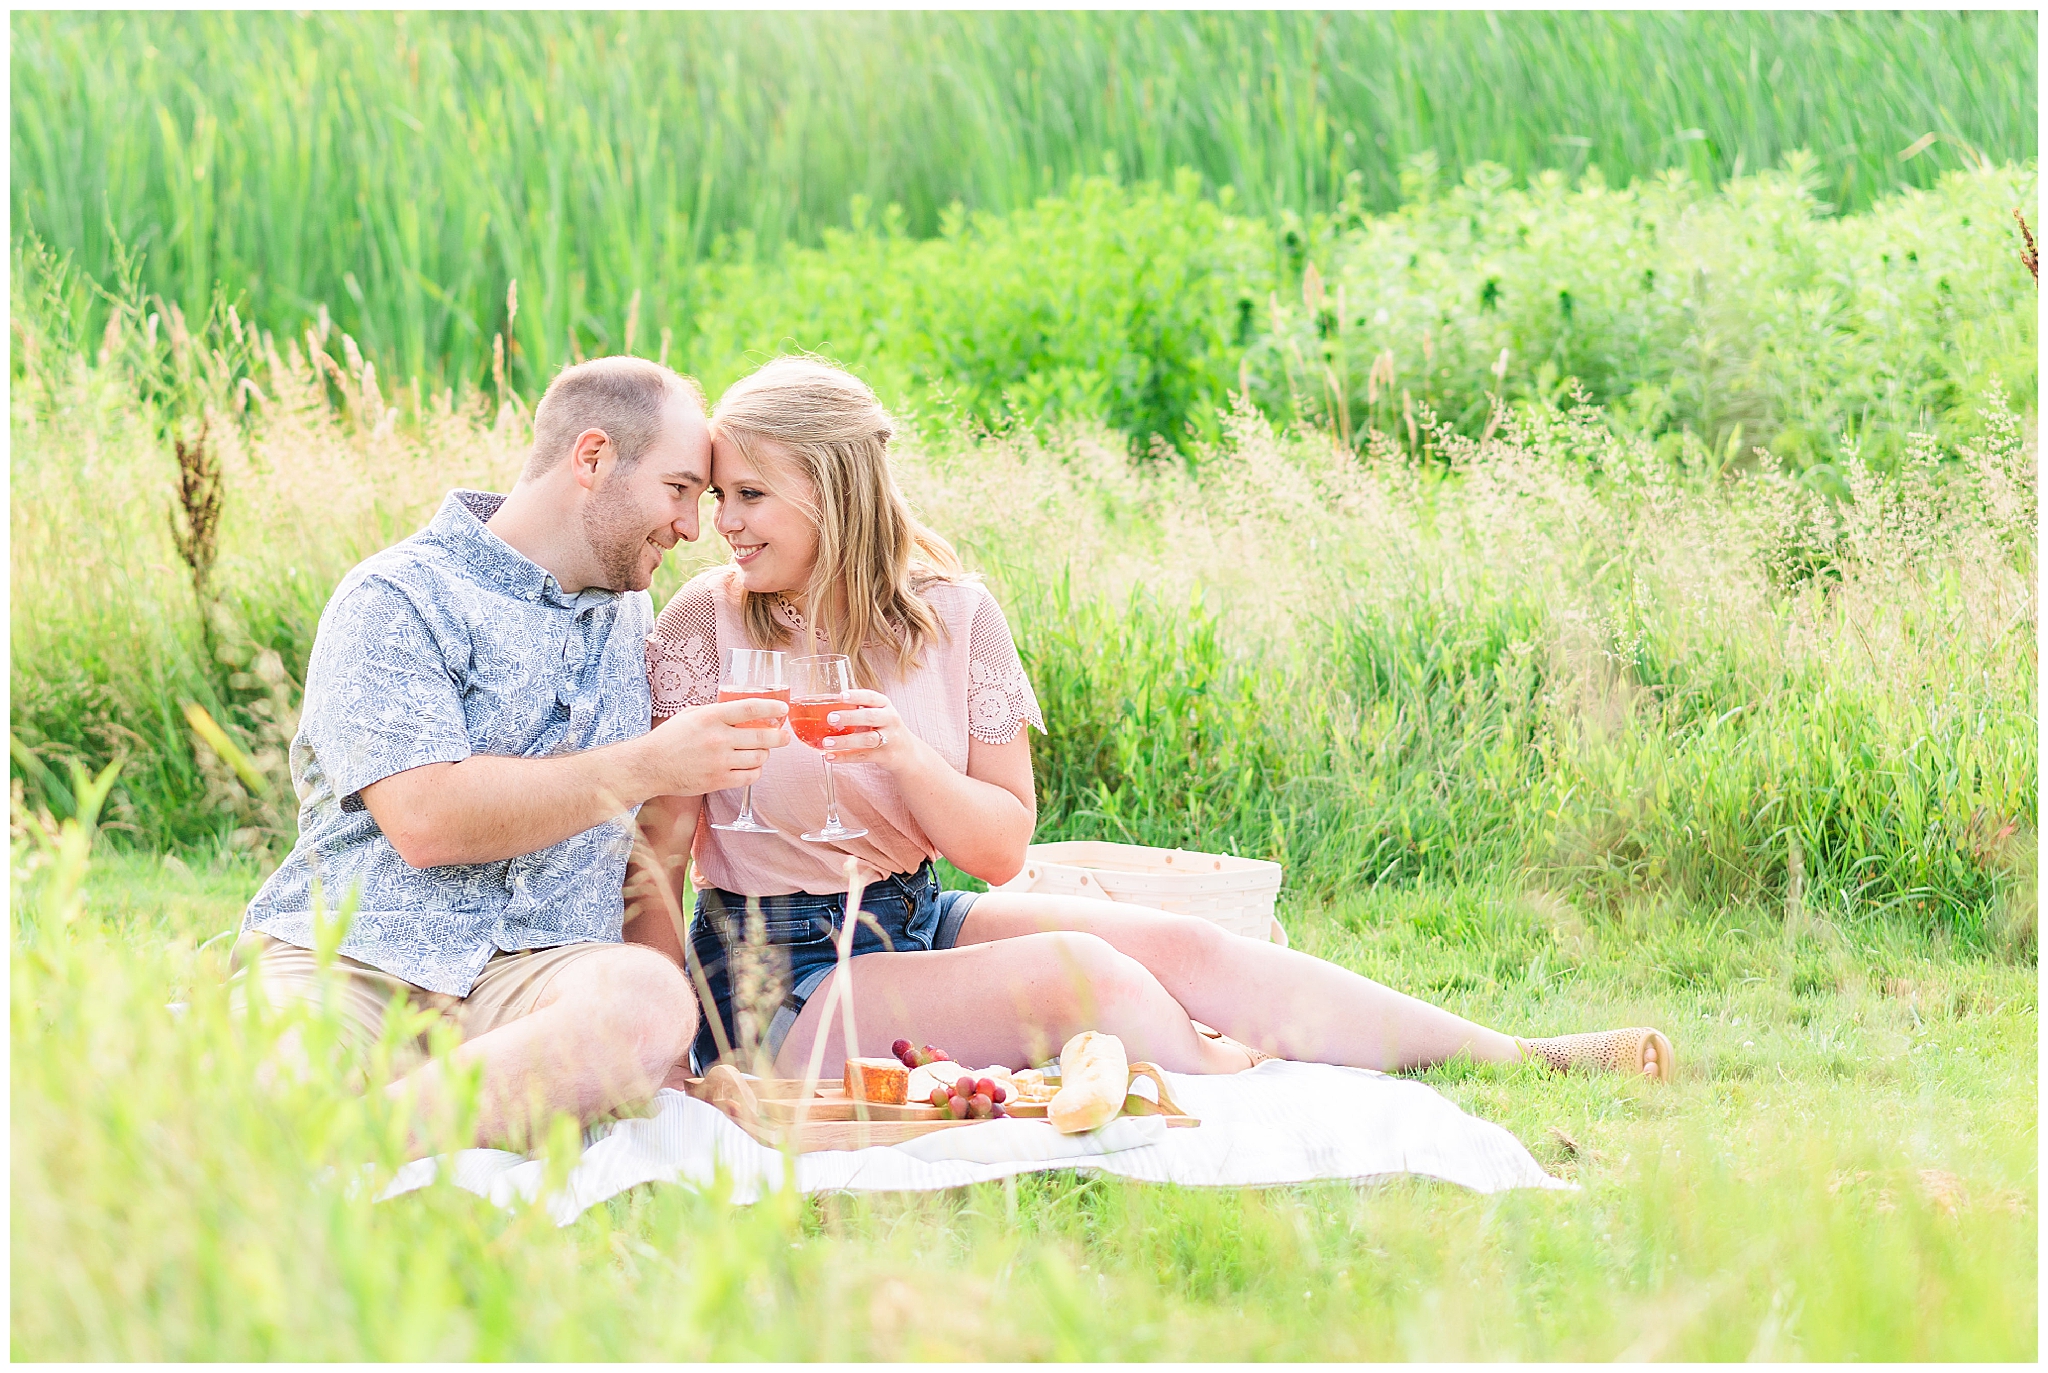 Romantic picnic engagement portrait at Cleveland's North Chagrin Reservation